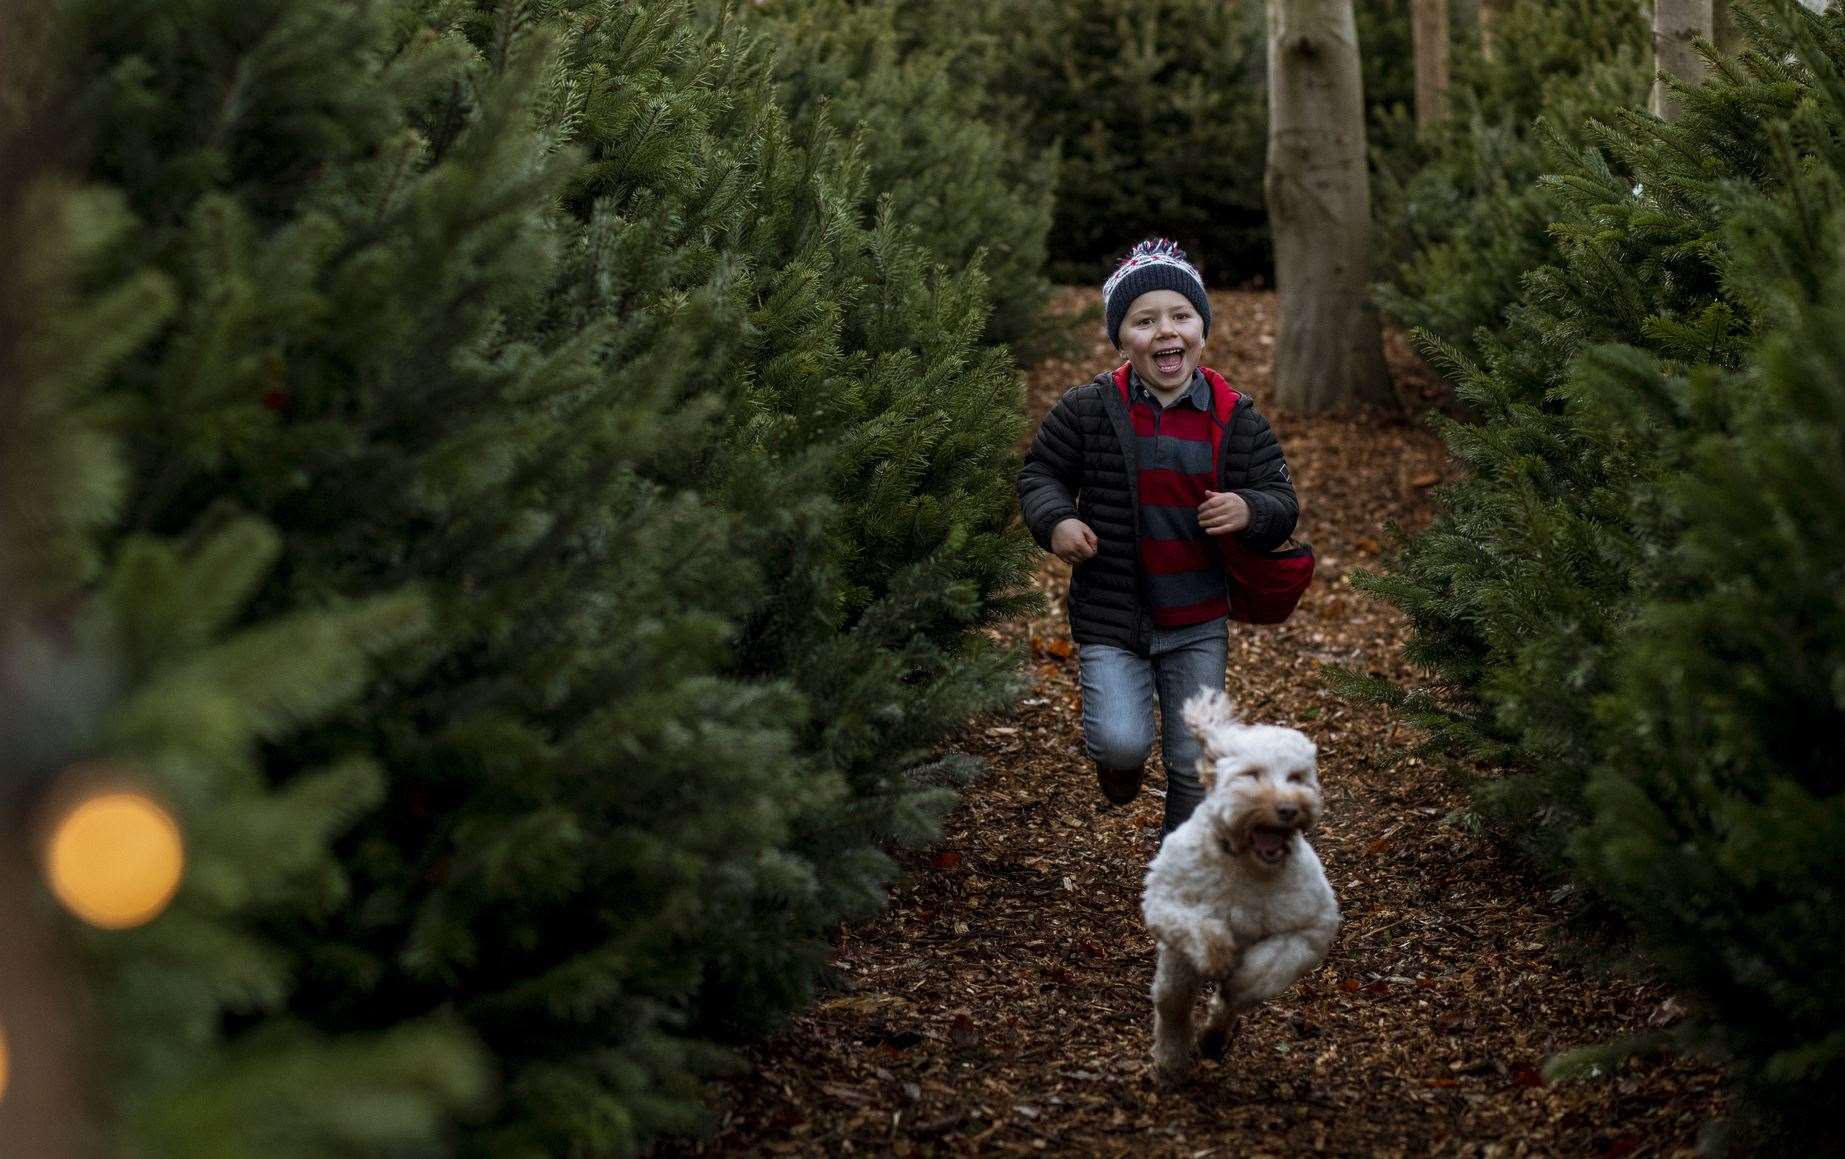 There are plants and trees it is worth watching your dogs around this Christmas. Image: iStock